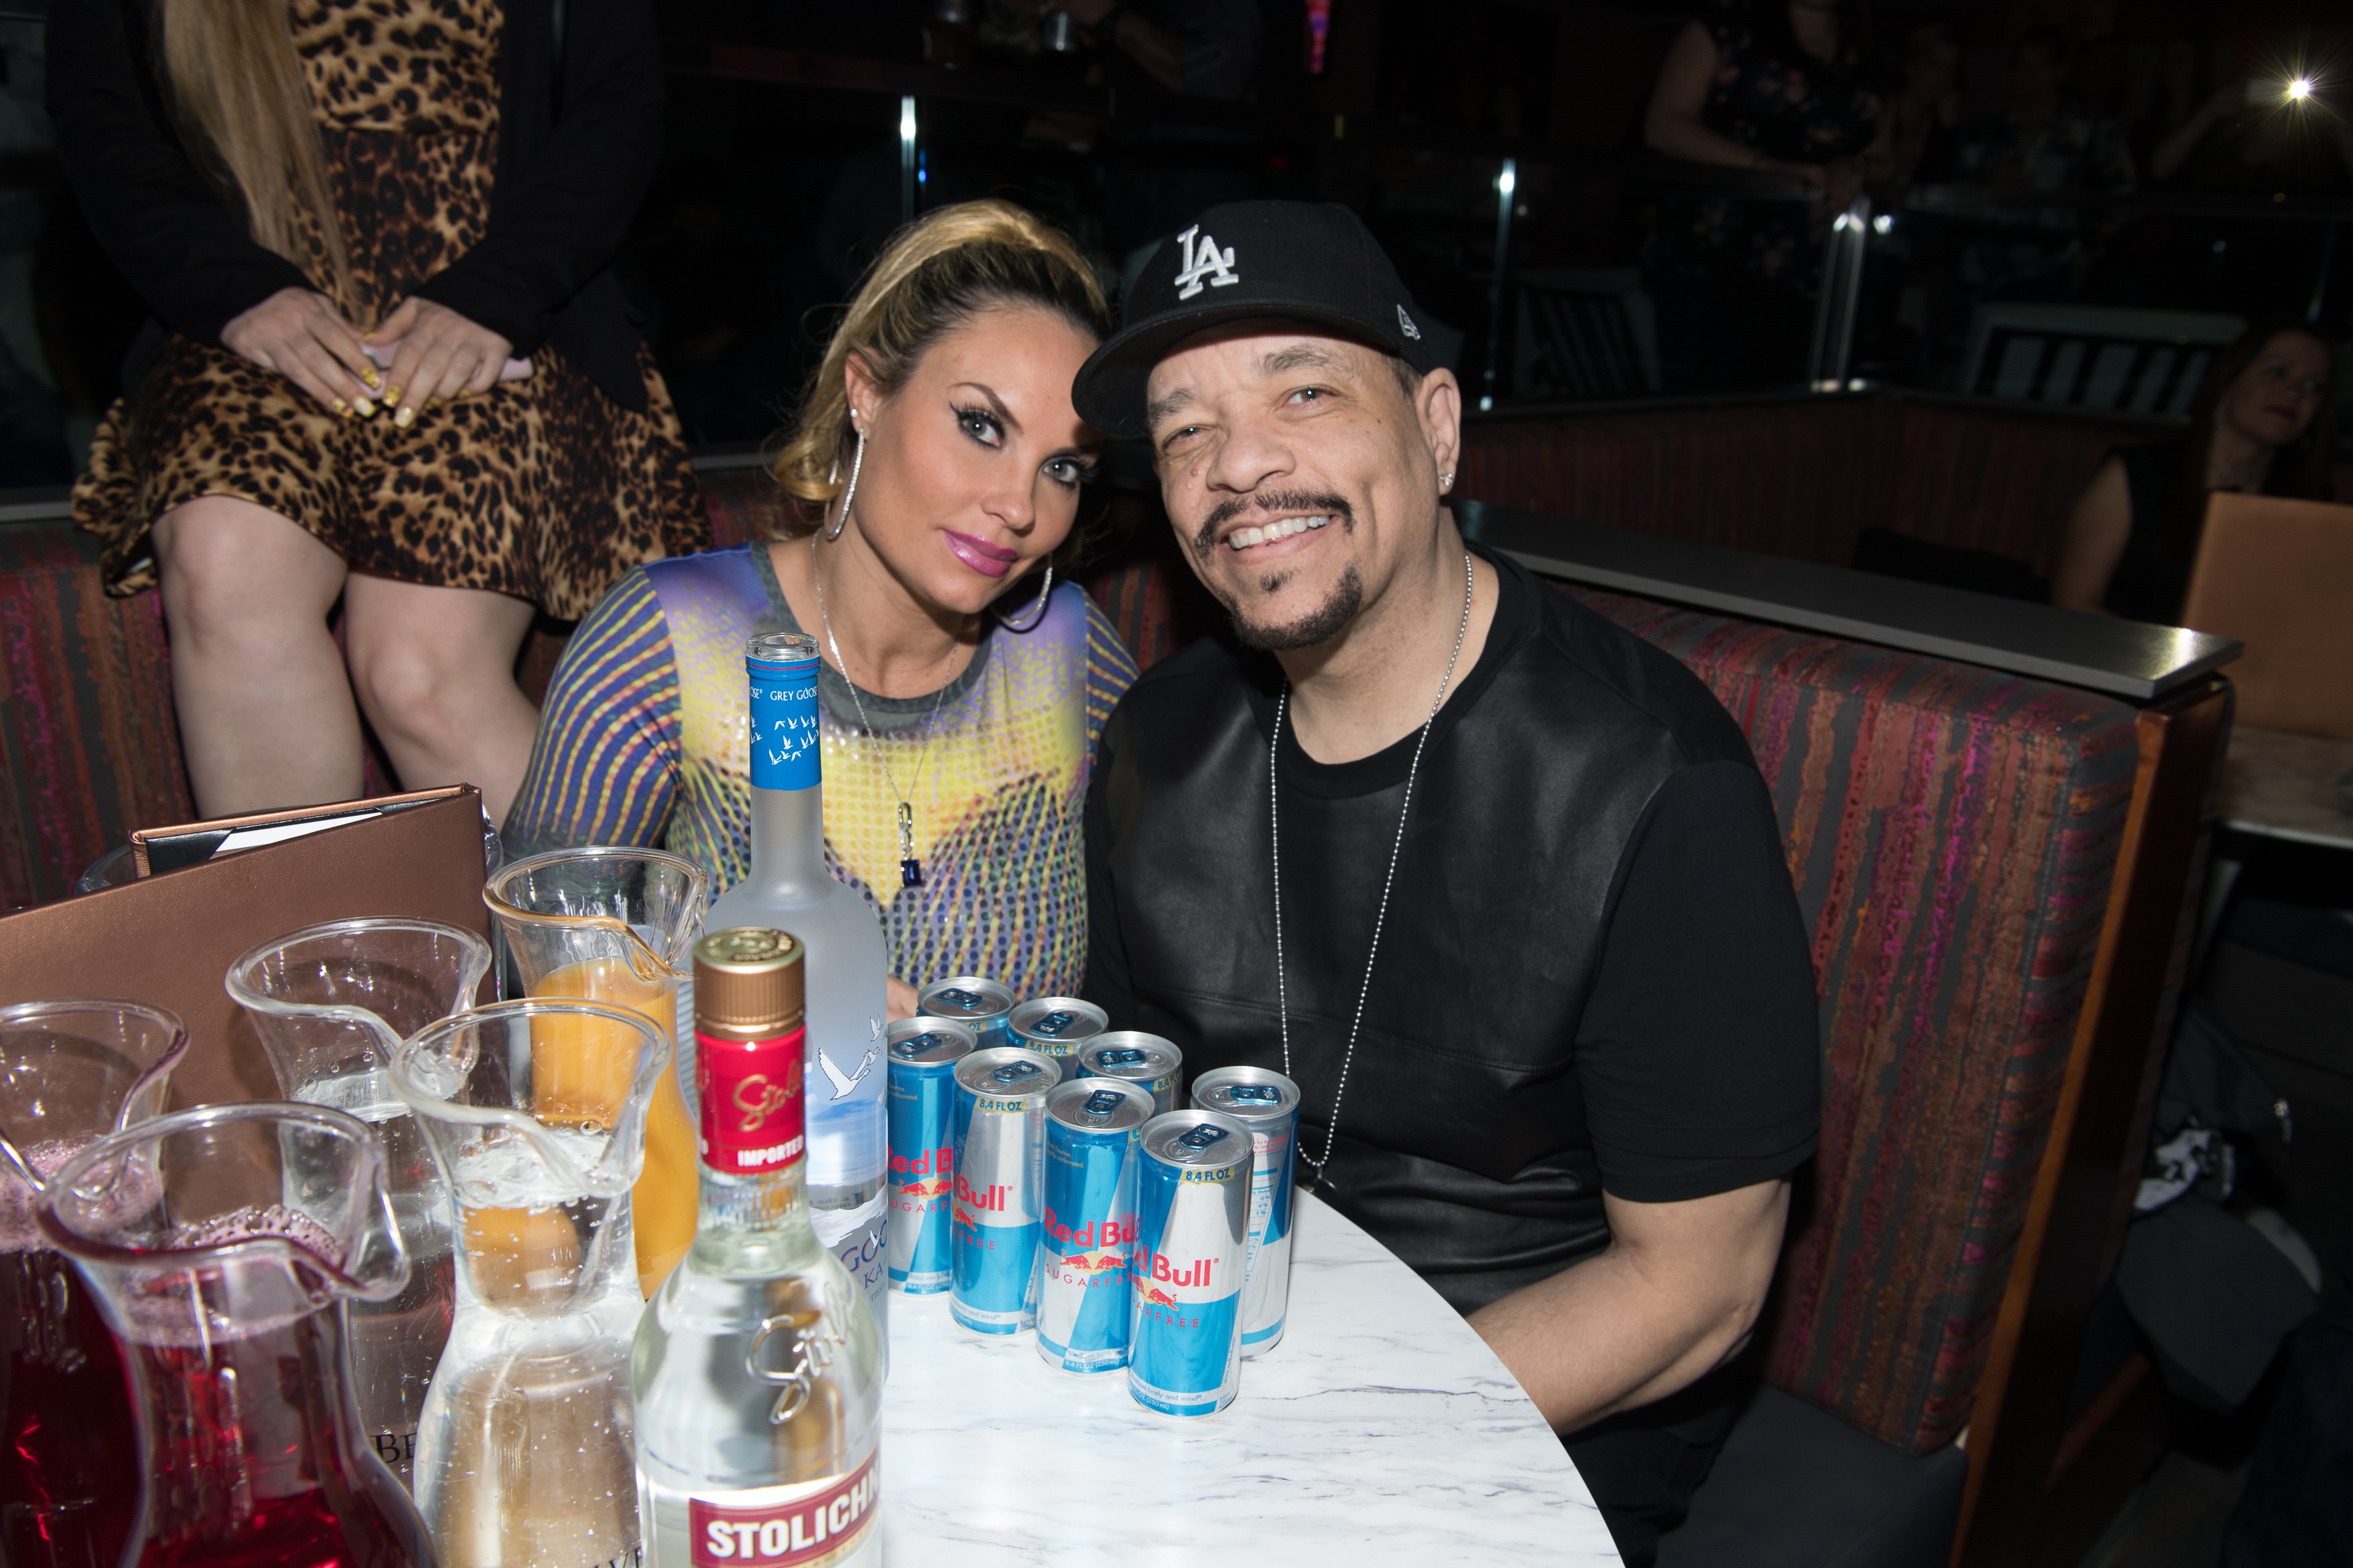 Ice-T and his wife Coco Austin at a party | Photo: Getty Images